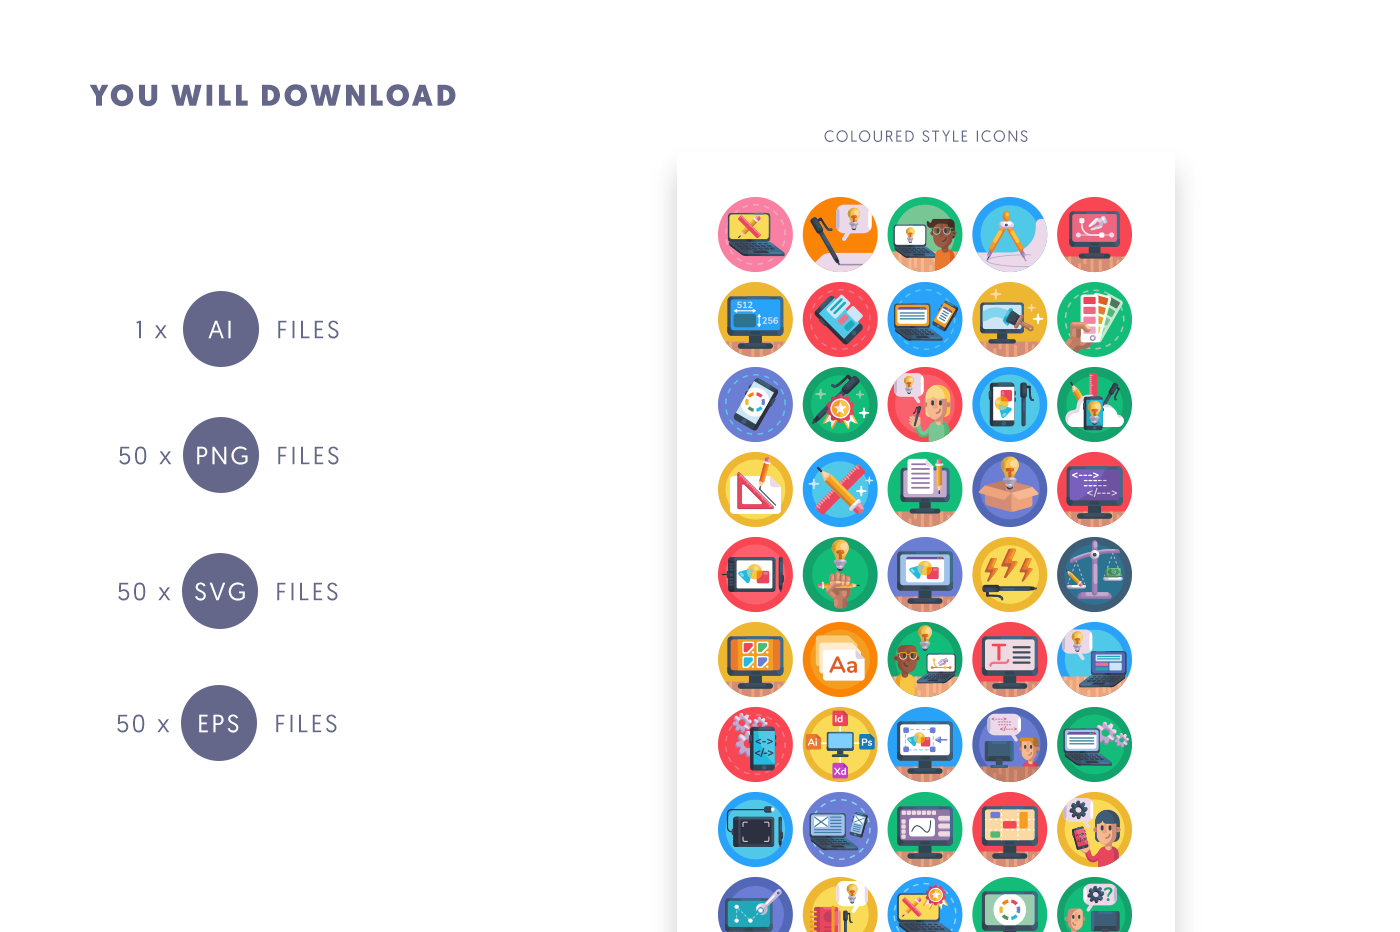 Compatible Design Icons pack